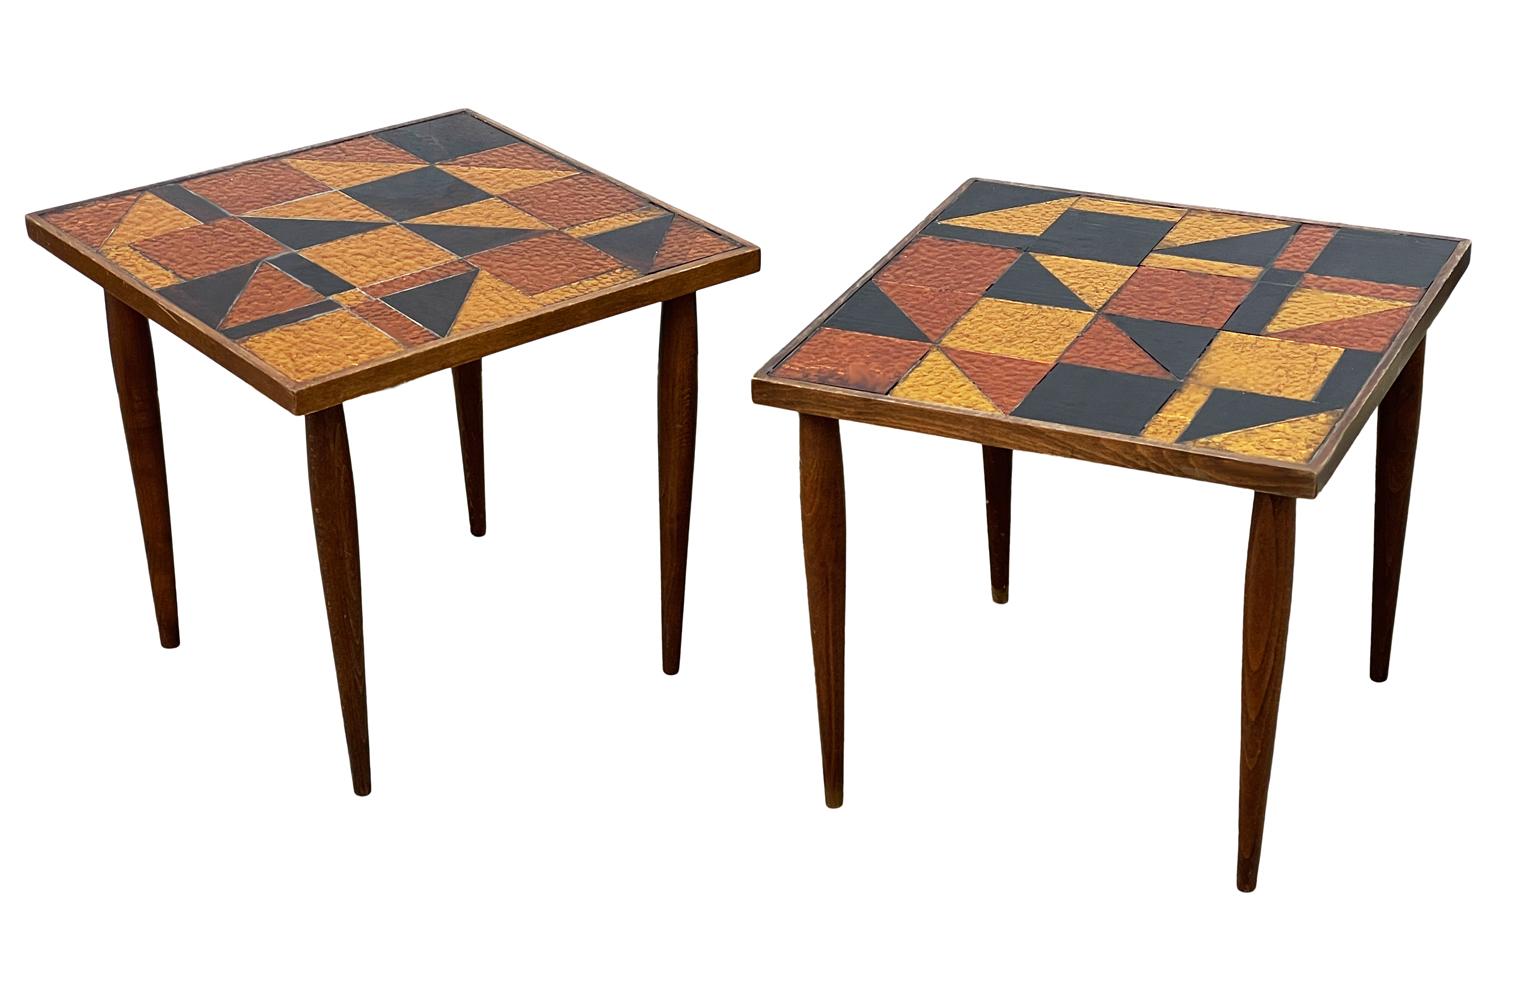 Pair of Mid Century Modern Georges Briard Stacking End Tables in Walnut & Glass In Good Condition For Sale In Philadelphia, PA